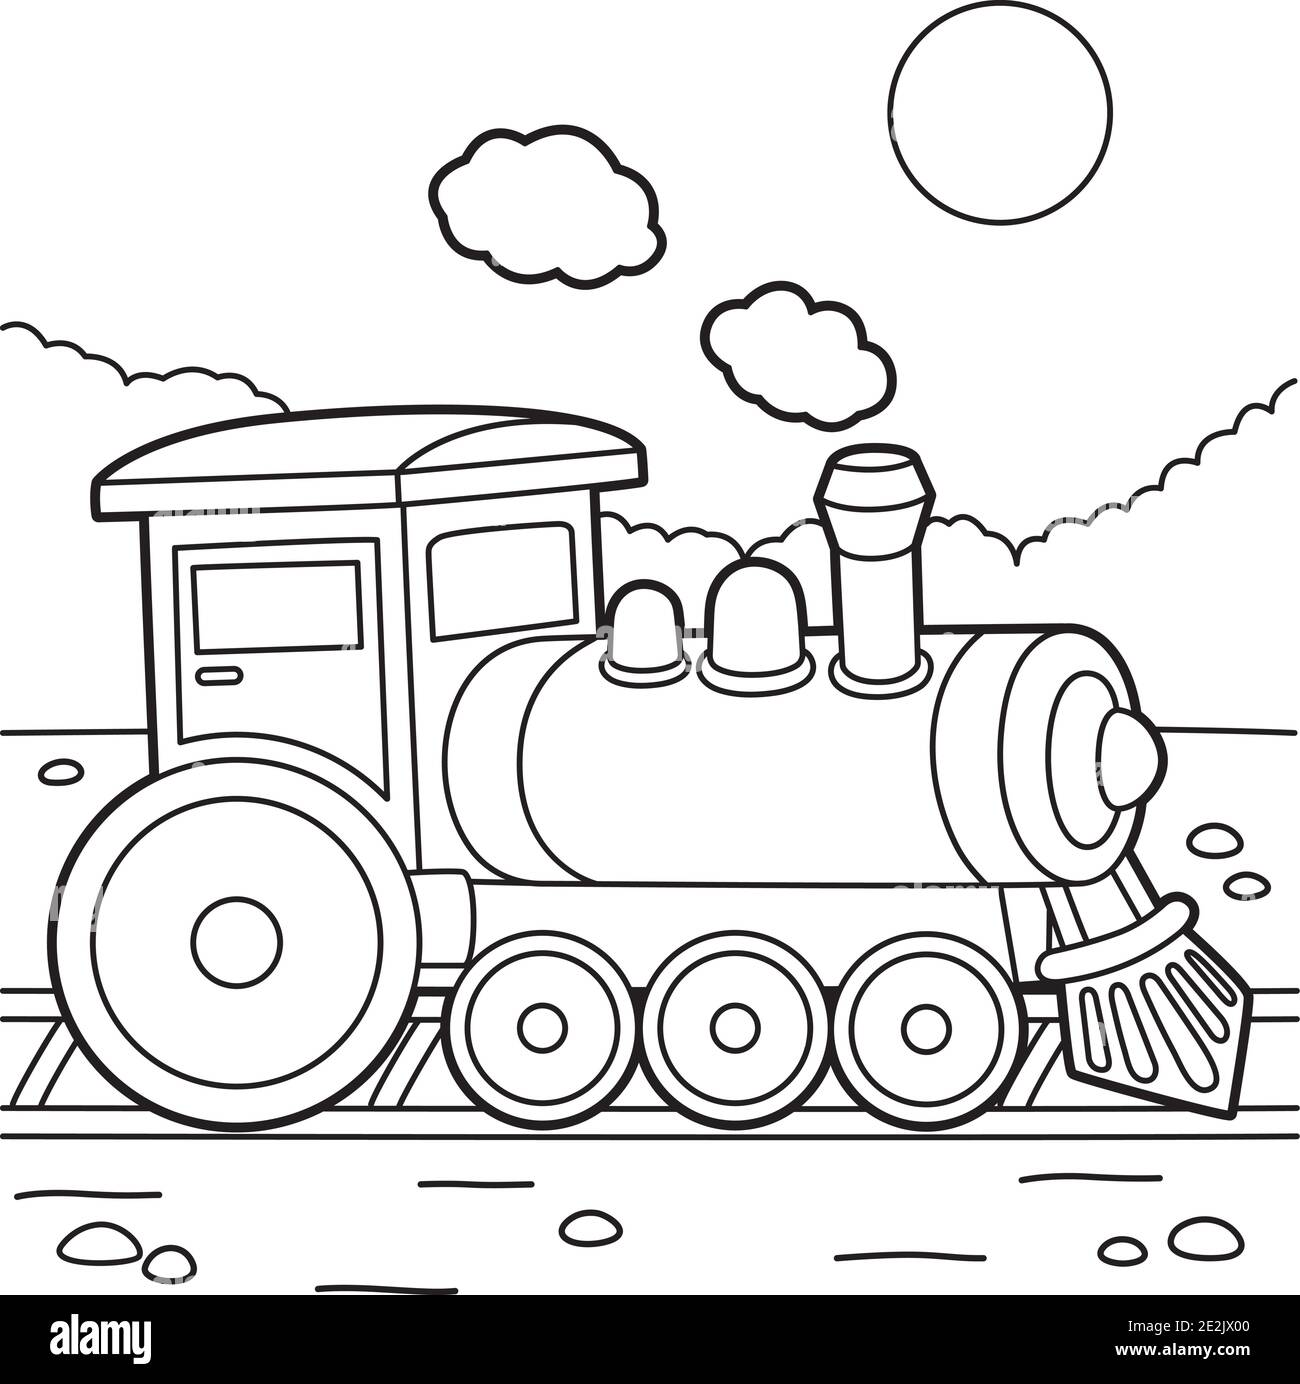 Steam Locomotive Coloring Page Stock Vector Image & Art   Alamy